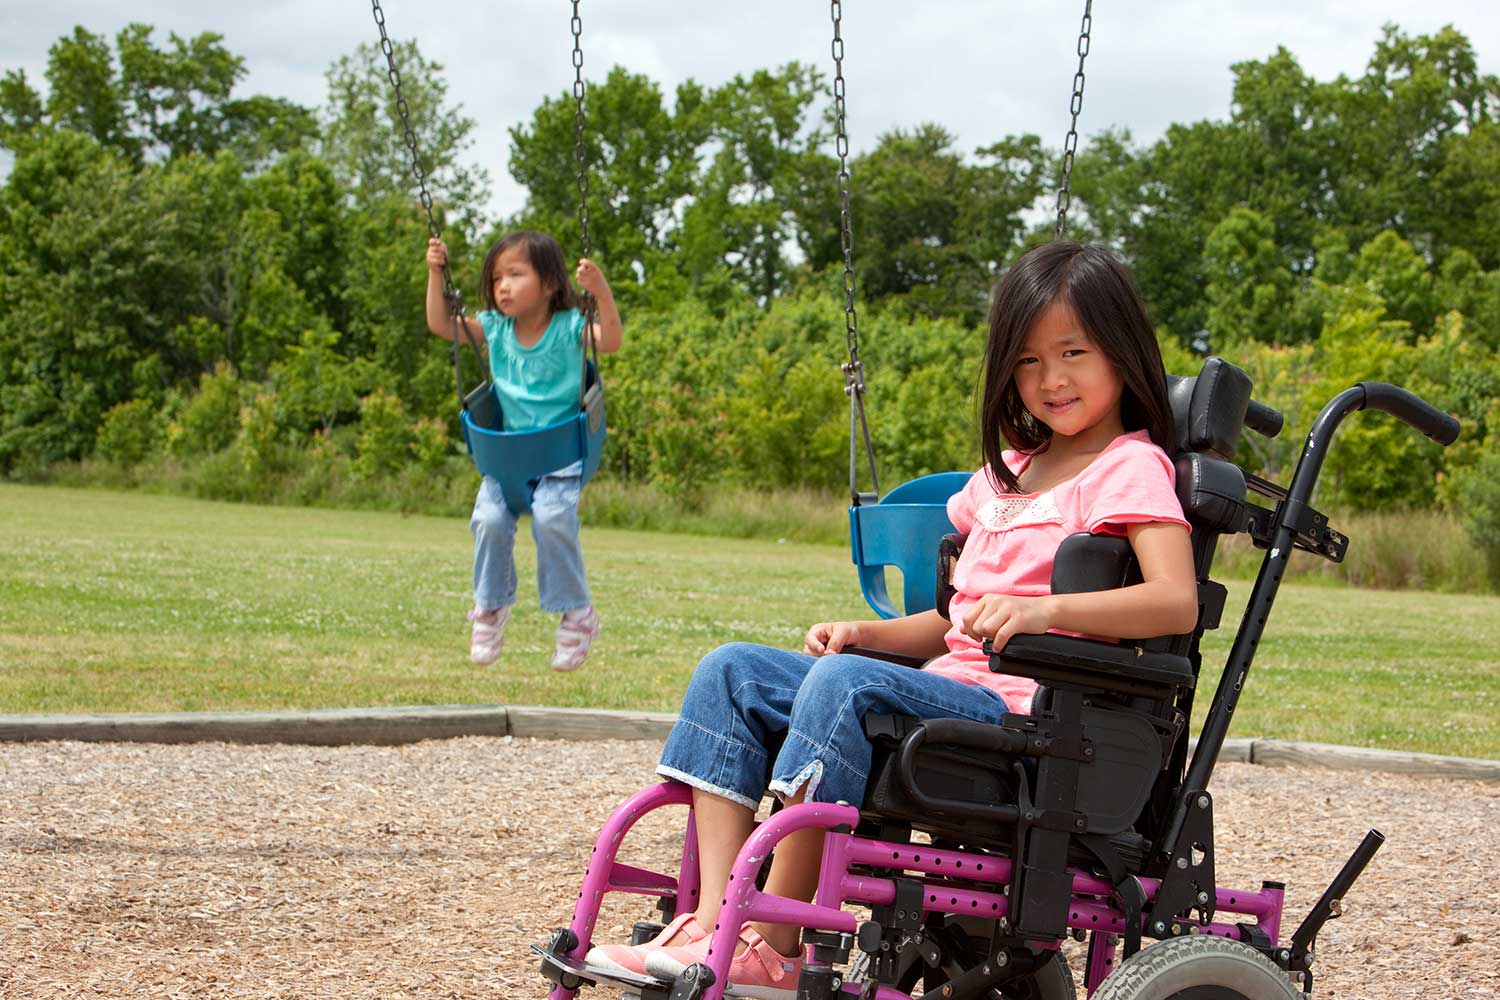 Accessible Playground for Disabled Children - Little Girl in a Wheelchair